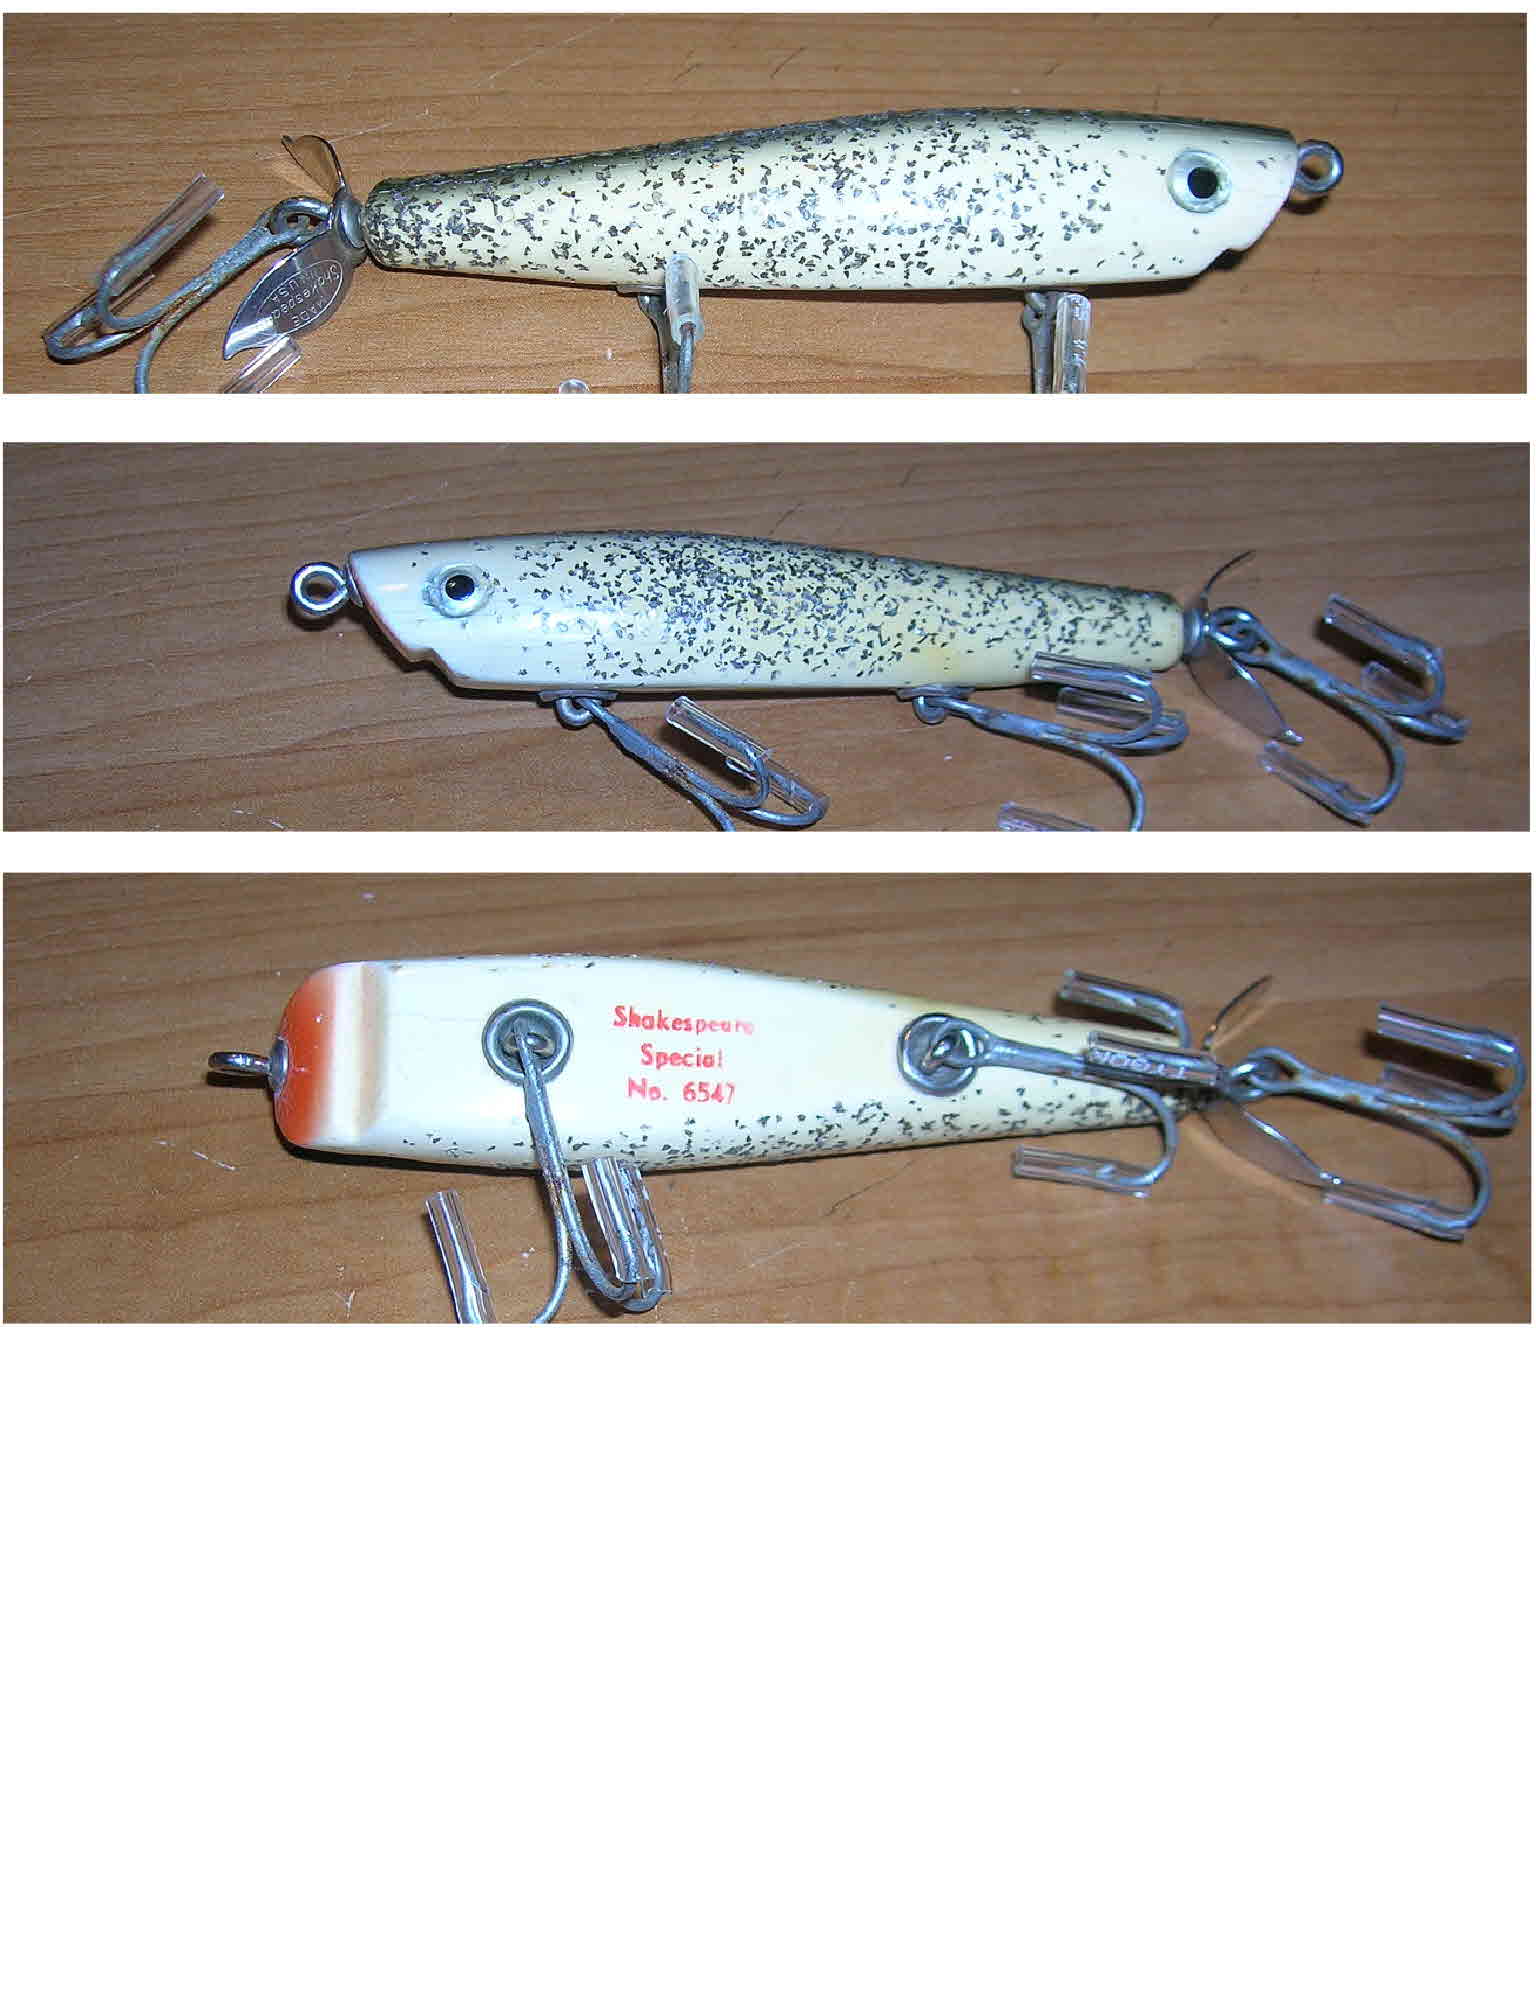 Evans Weed Queen Vintage Wood Fishing Lure with Glass Eyes in